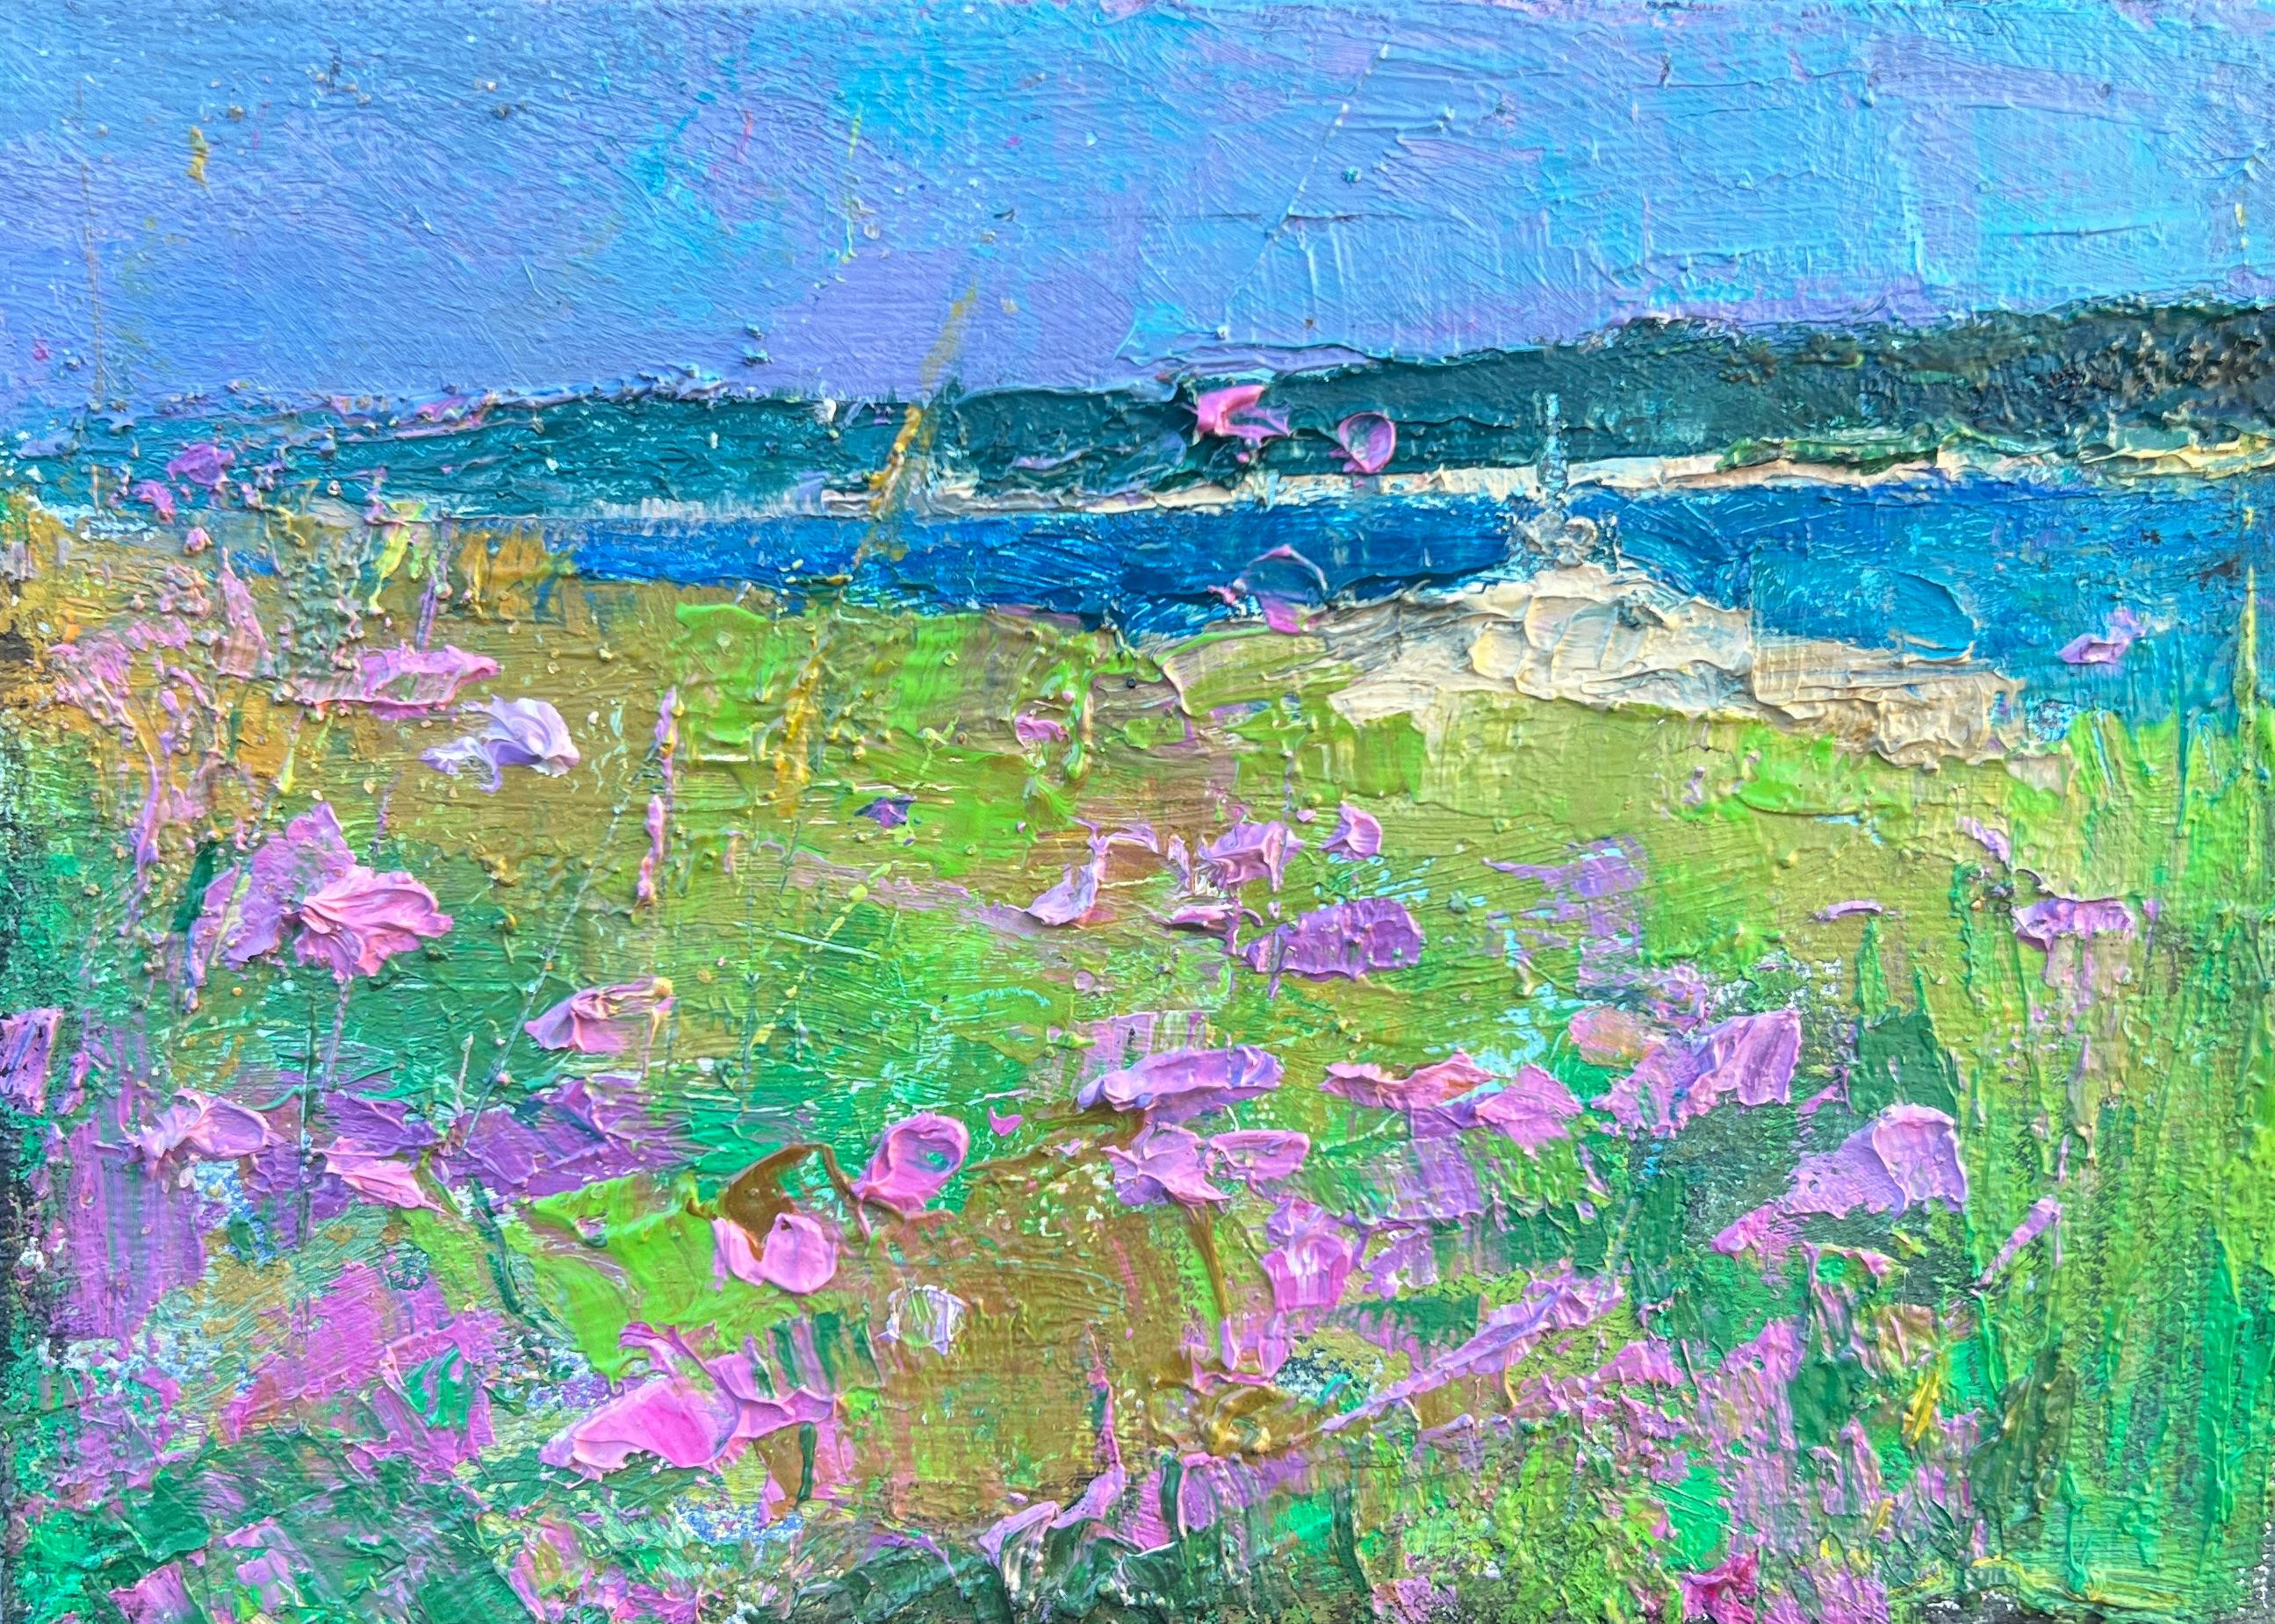 Larry Horowitz Landscape Painting - "Wildflowers of Spring" small scale oil painting of pink flowers in dune grass